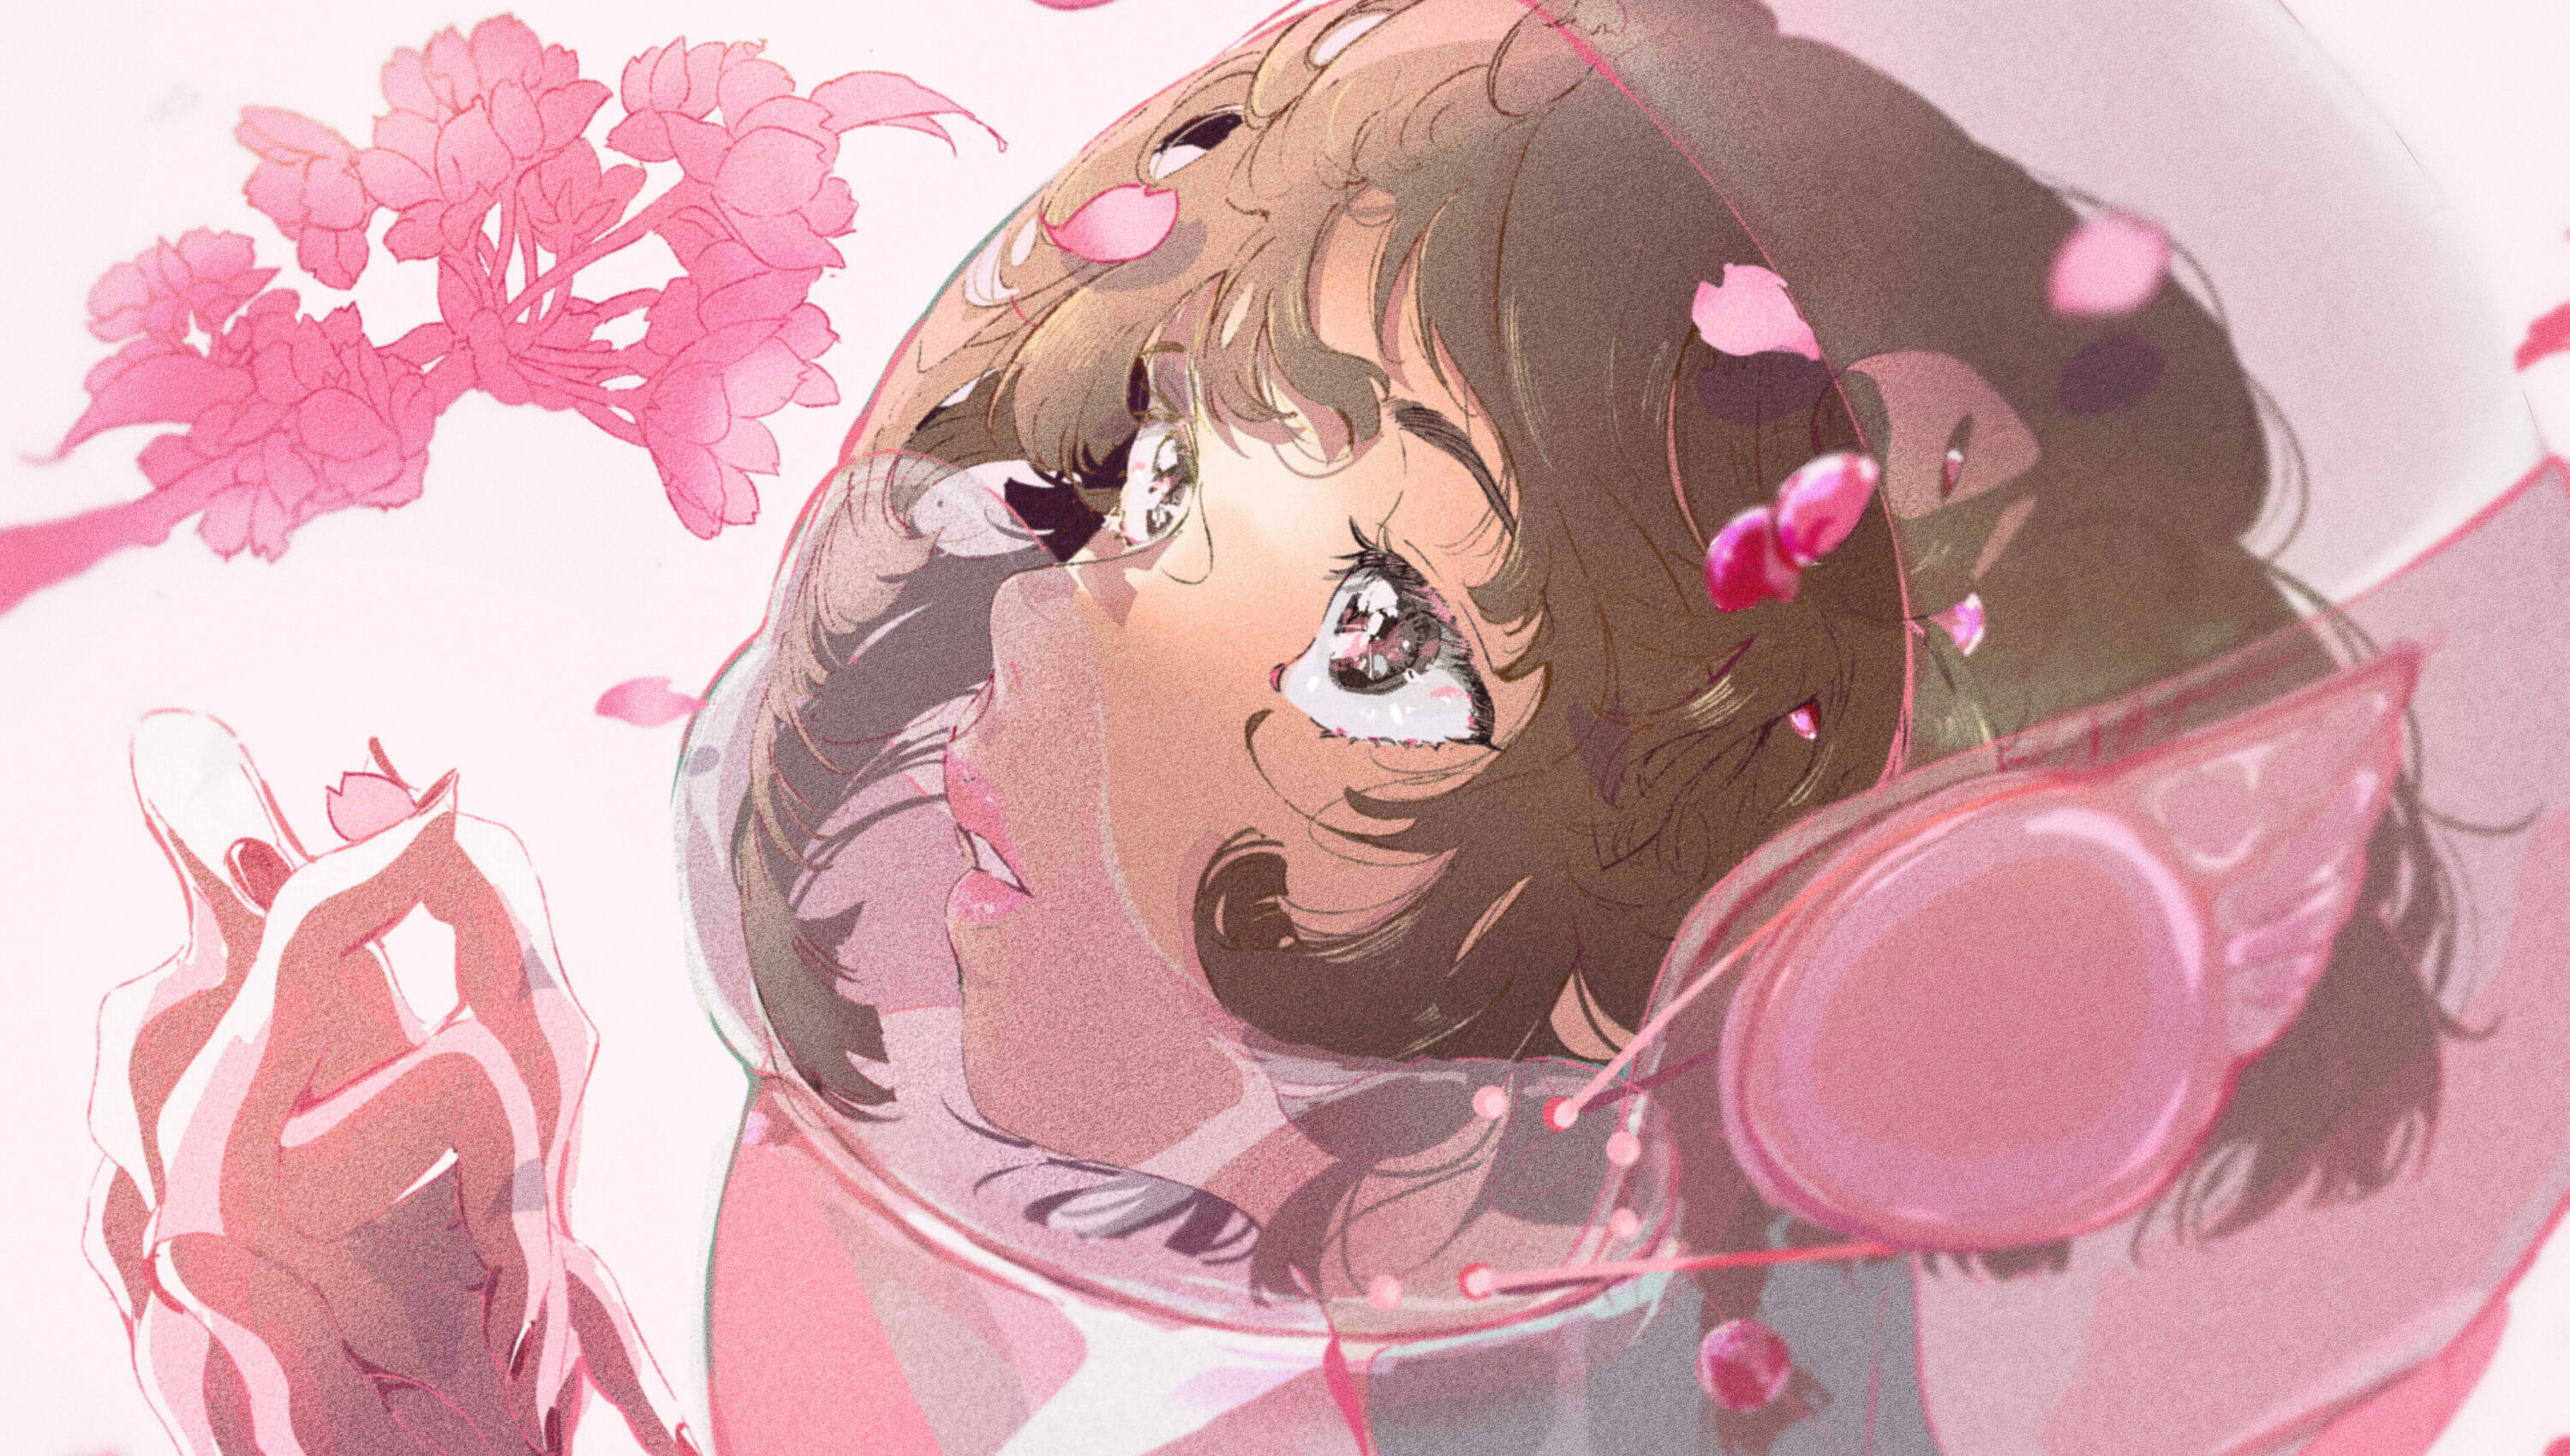 Anime Anime Girls Brunette Space Suit Hands Long Nails Looking Away Short Hair Bangs Pink Flowers Ch 3000x1700